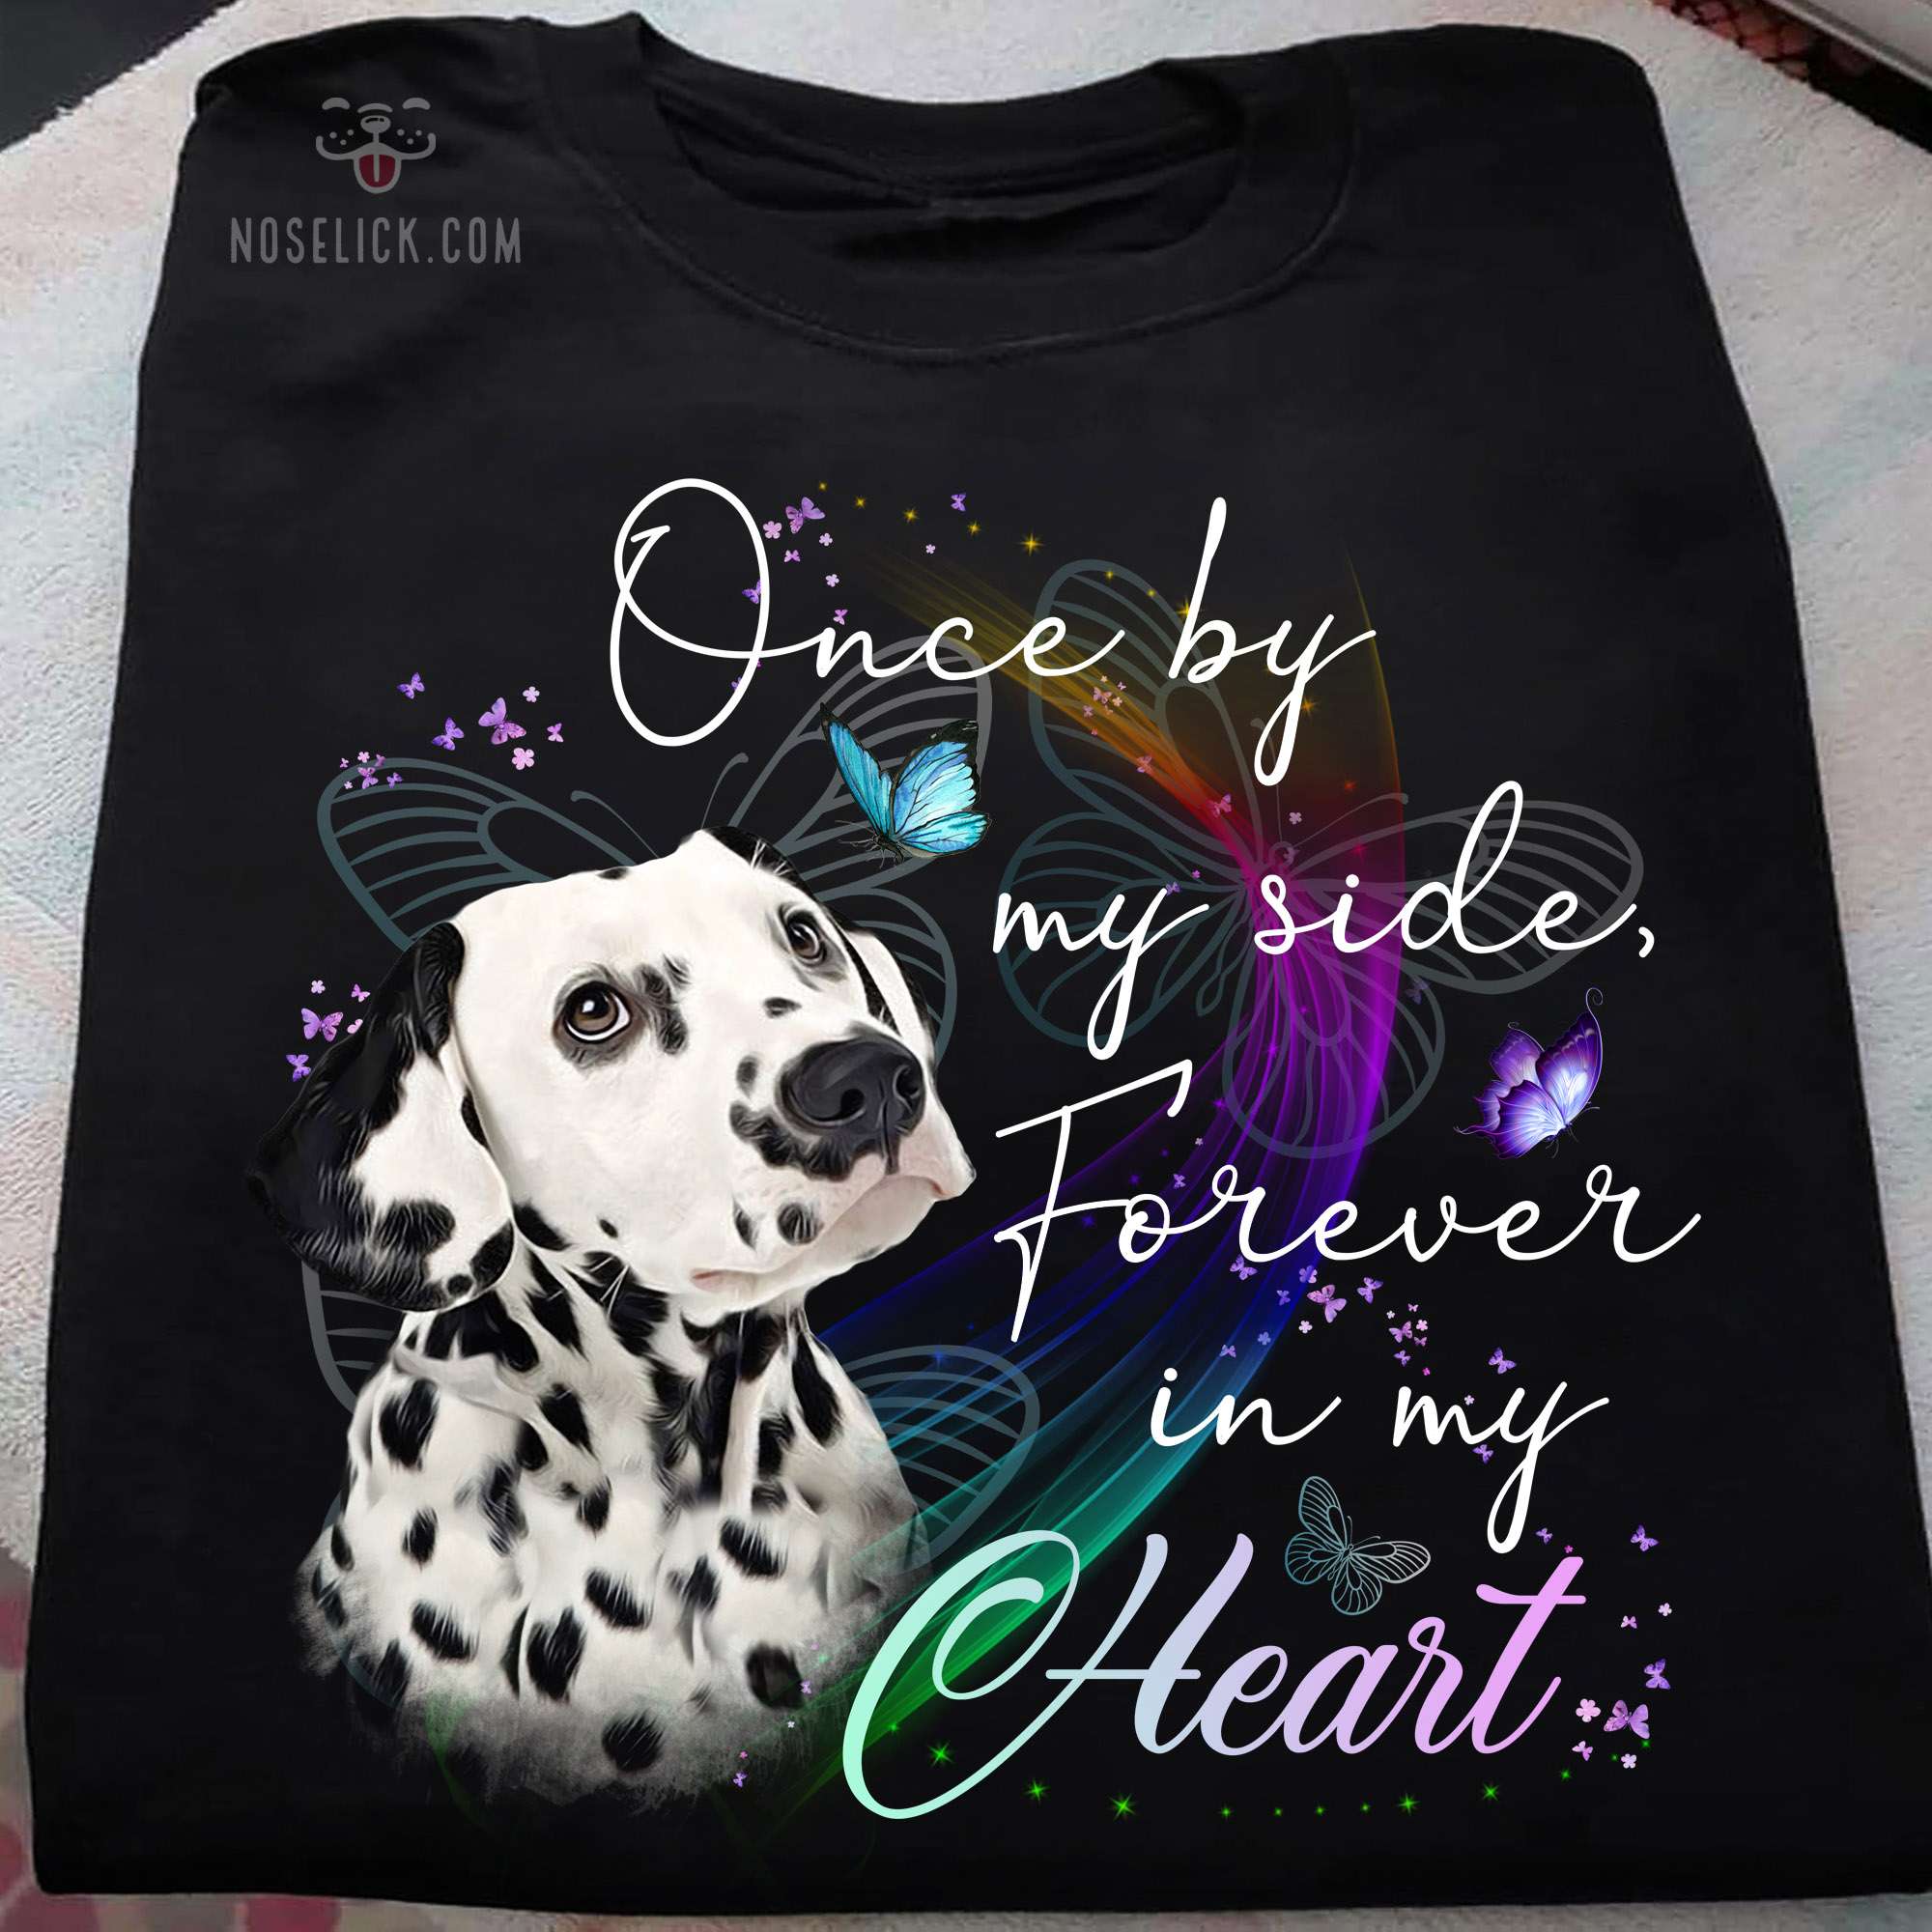 Once by my side, forever in my heart - Dalmatian dog